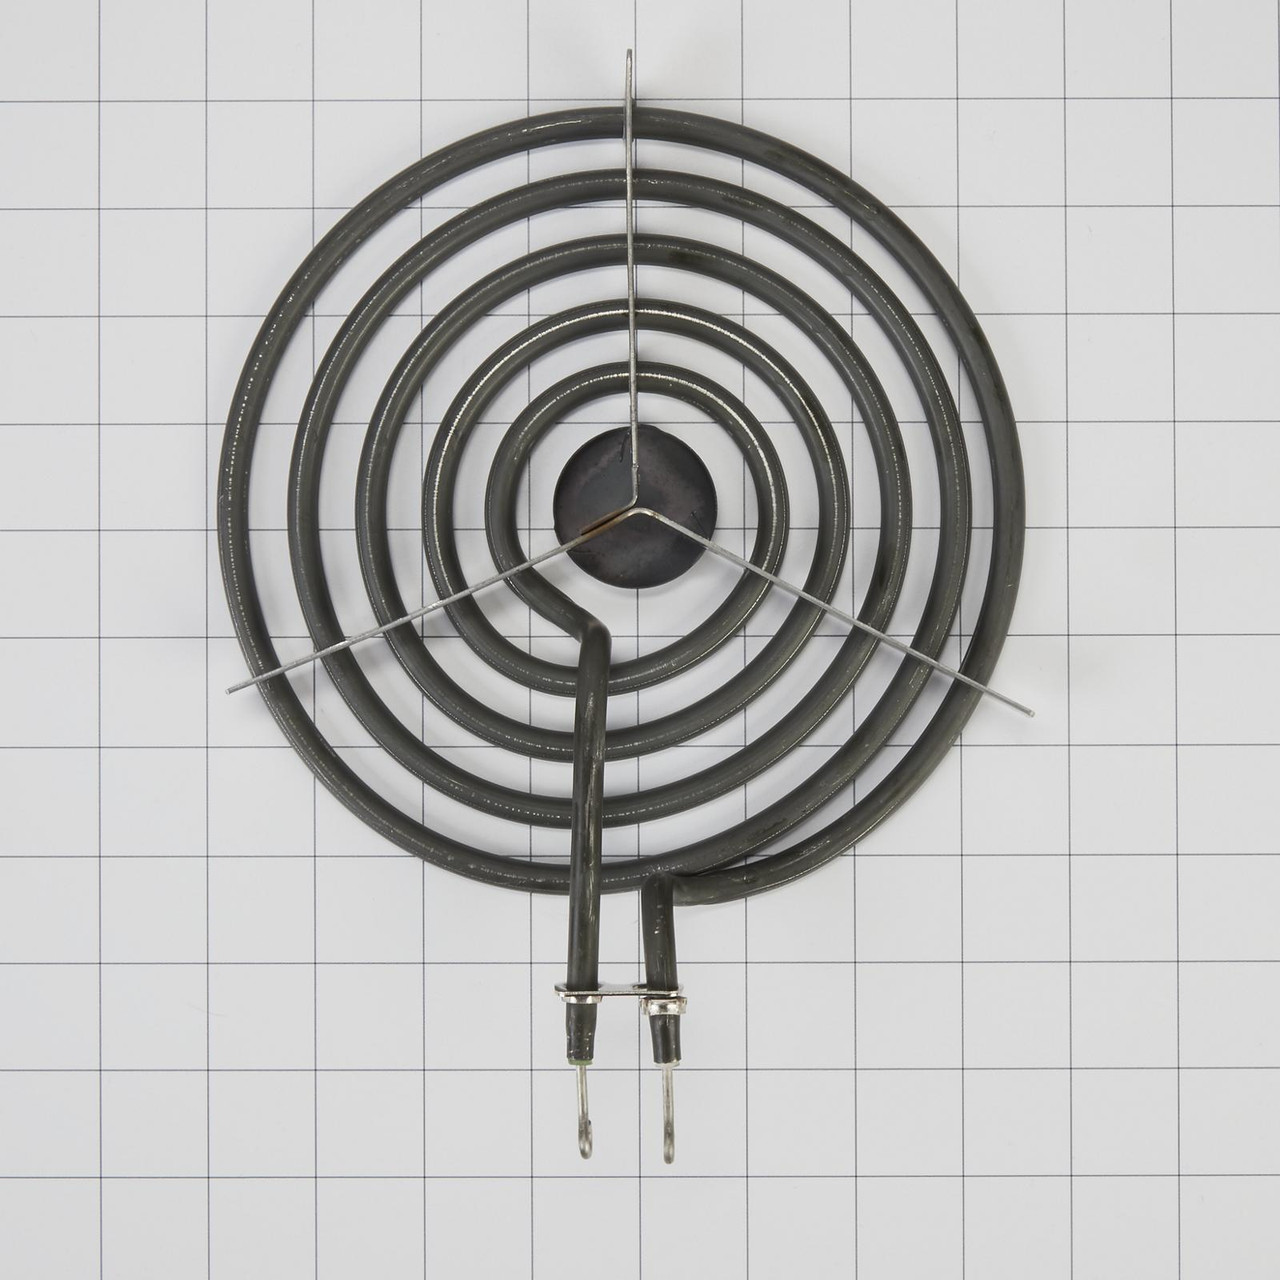 Whirlpool WP660533 - Electric Range Coil Surface Element - Image # 3